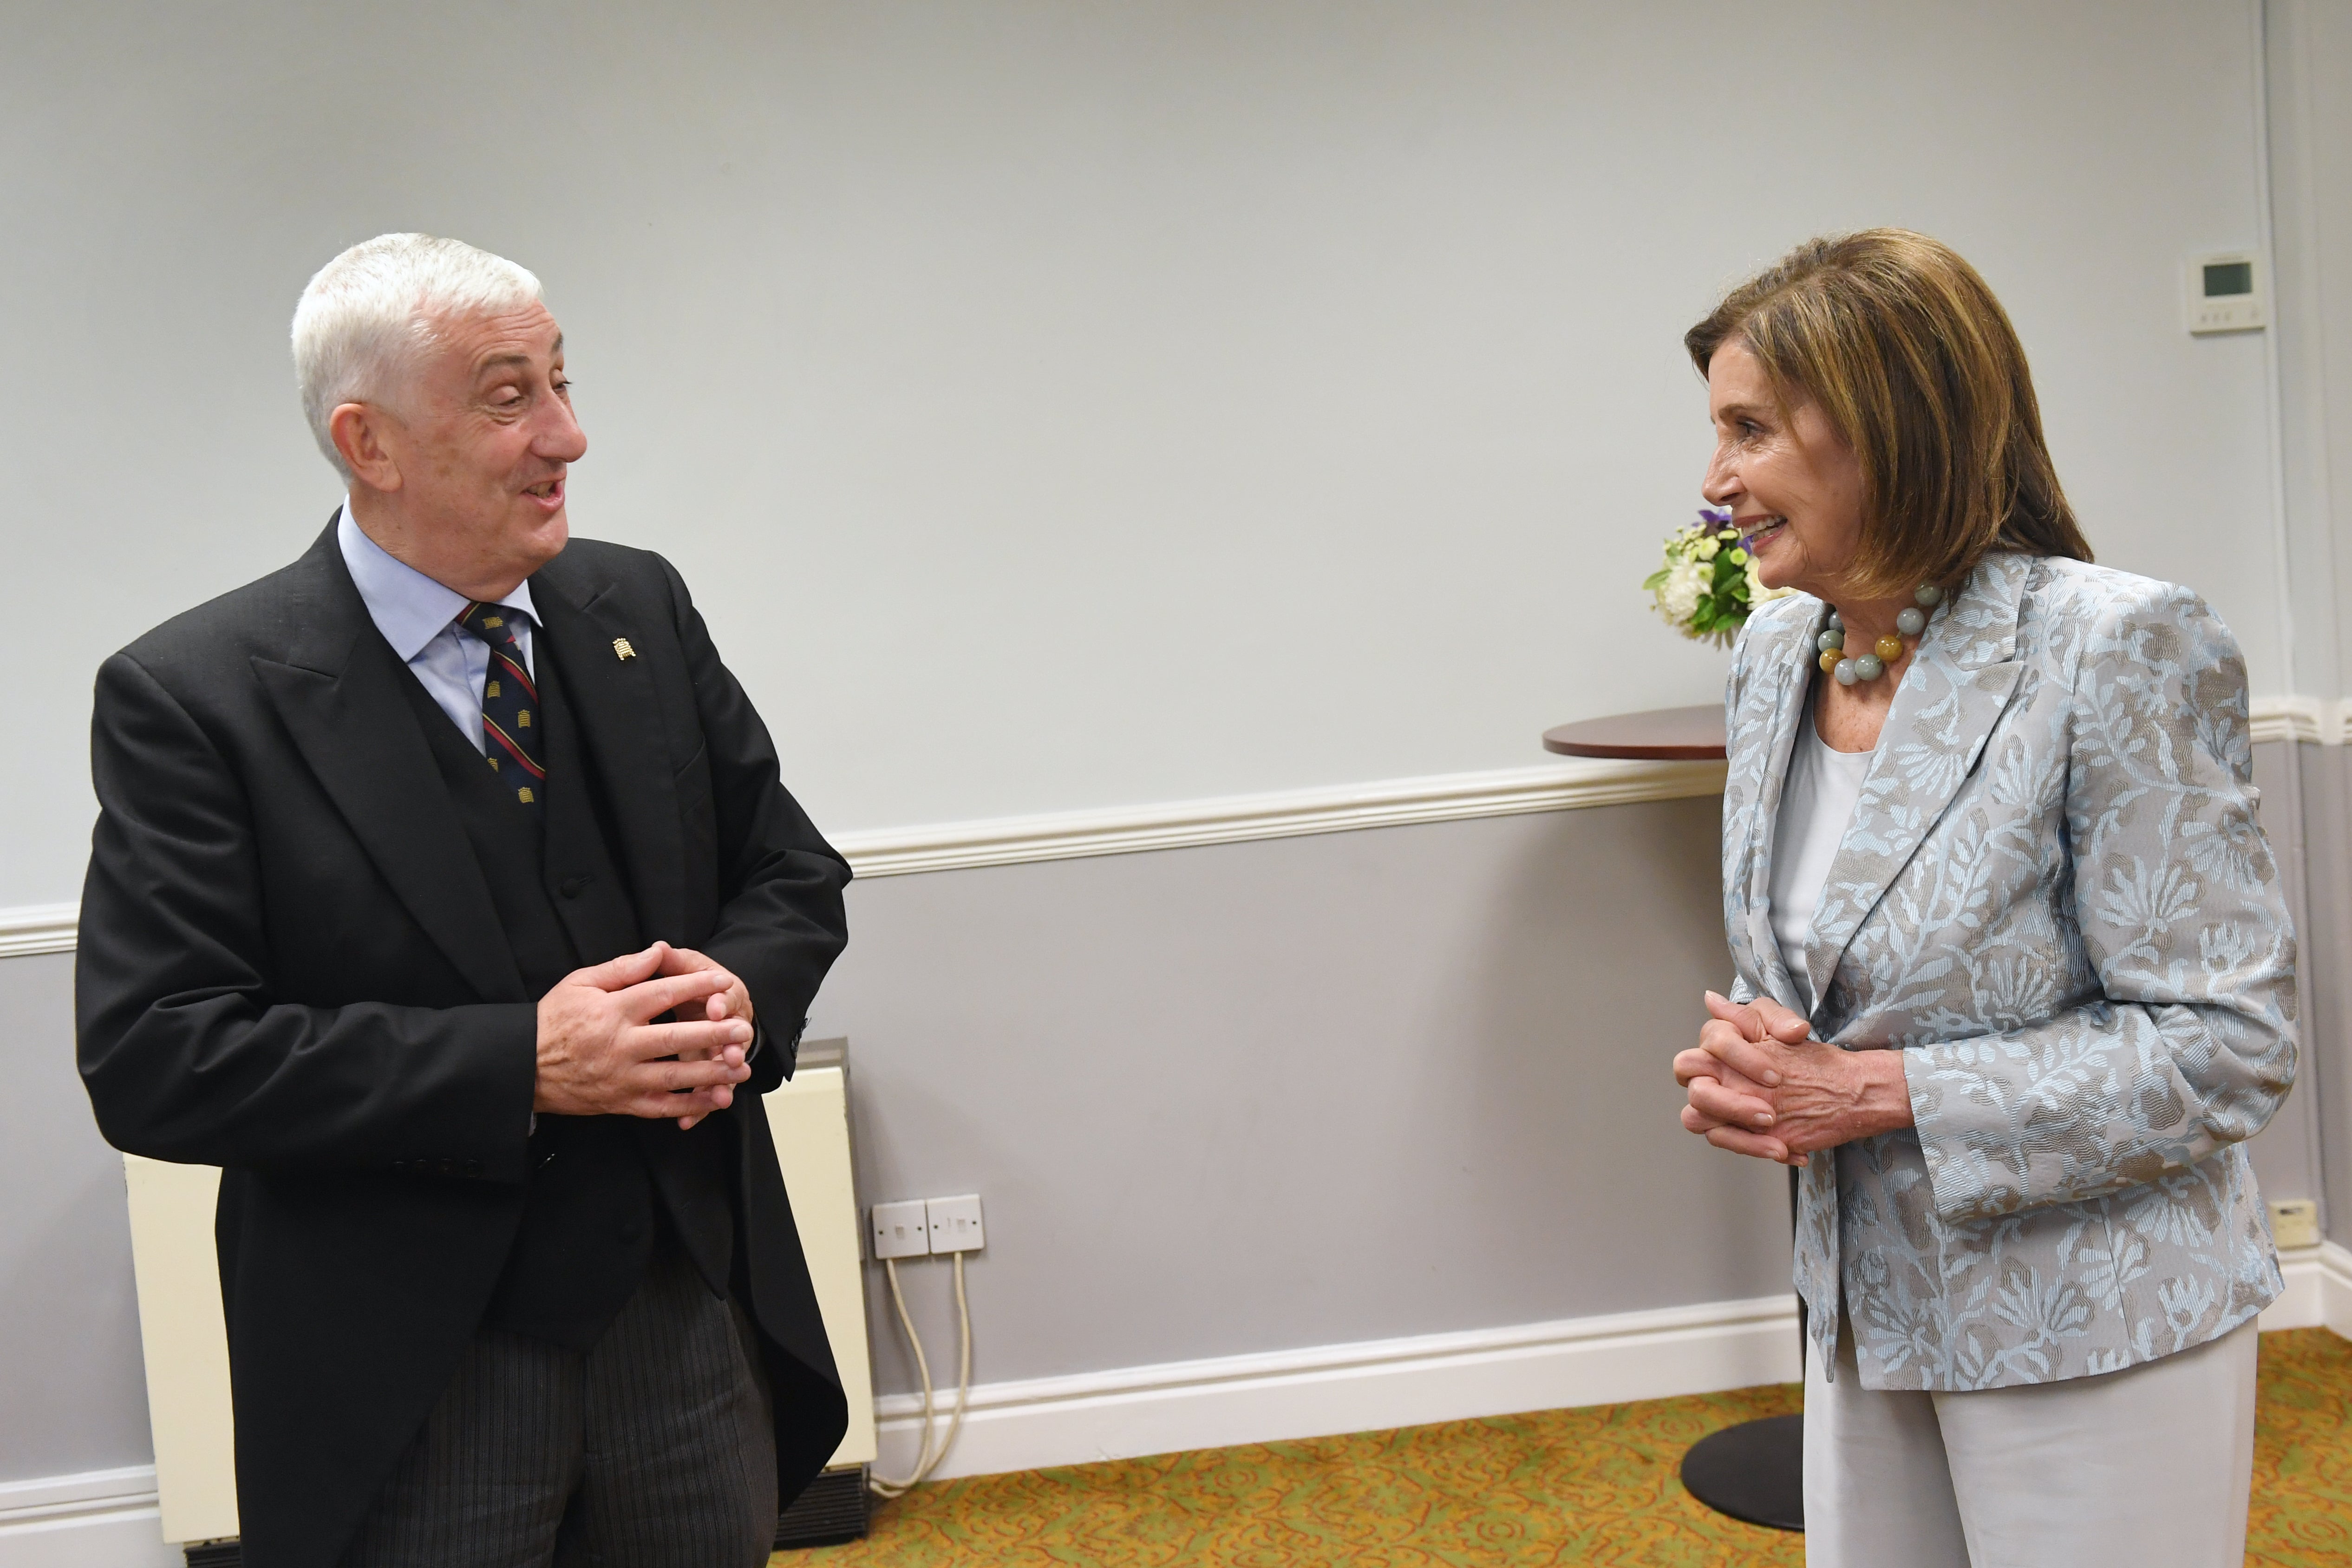 Sir Lindsay Hoyle presented a Warrington short to Nancy Pelosi, Speaker of the US House of Representatives, during the G7 Summit (UK Parliament/Jessica Taylor/PA handout)